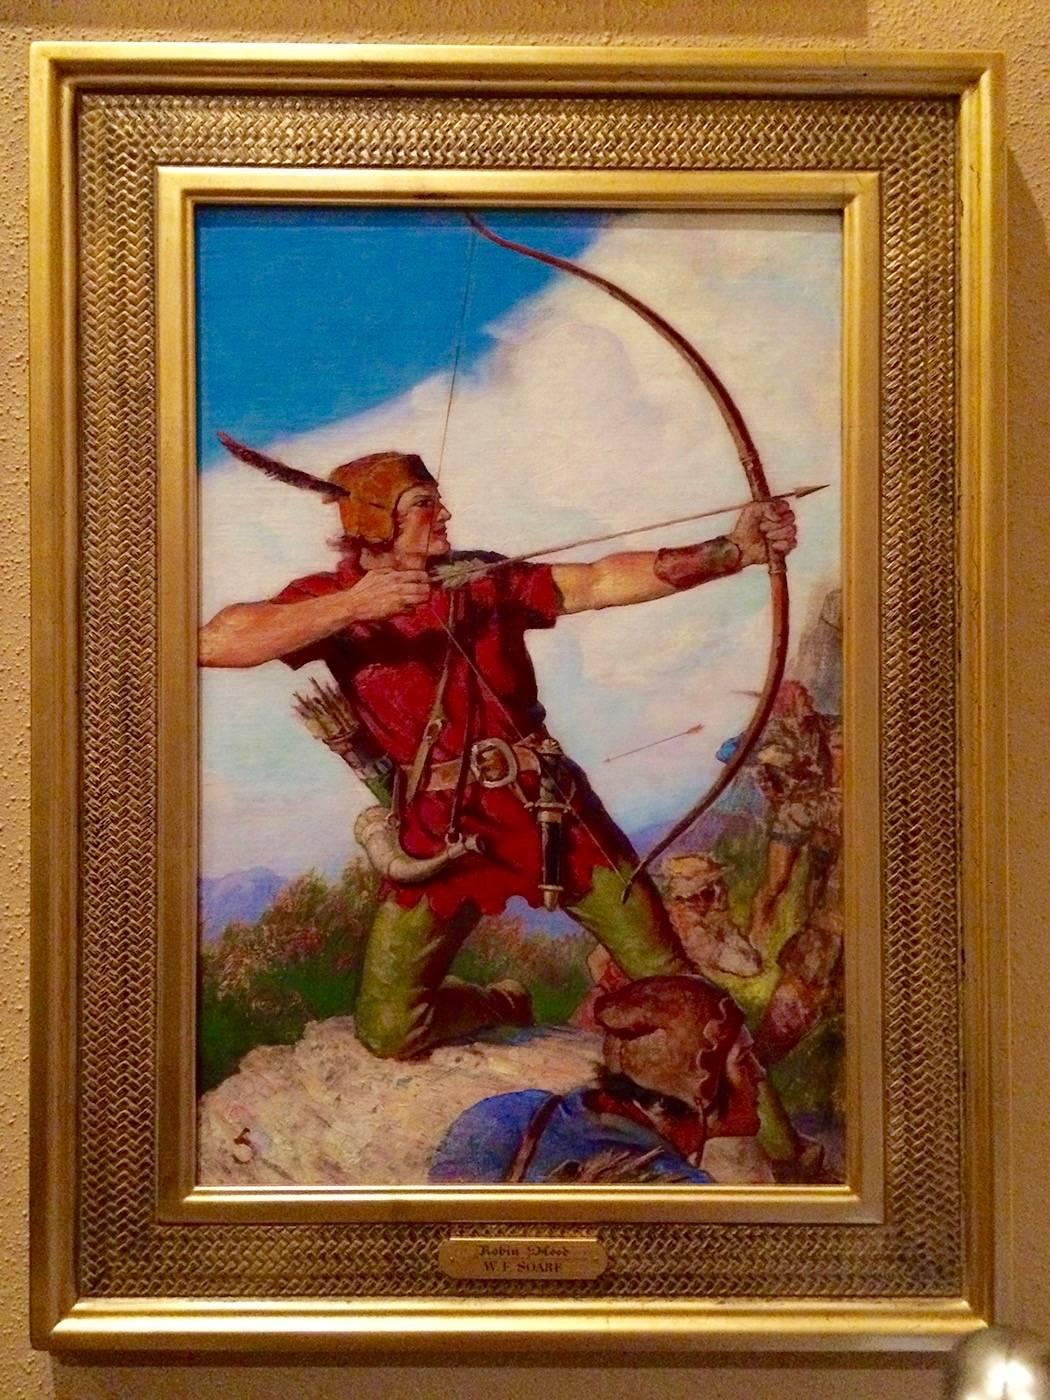 Robin Hood - Painting by William Soare